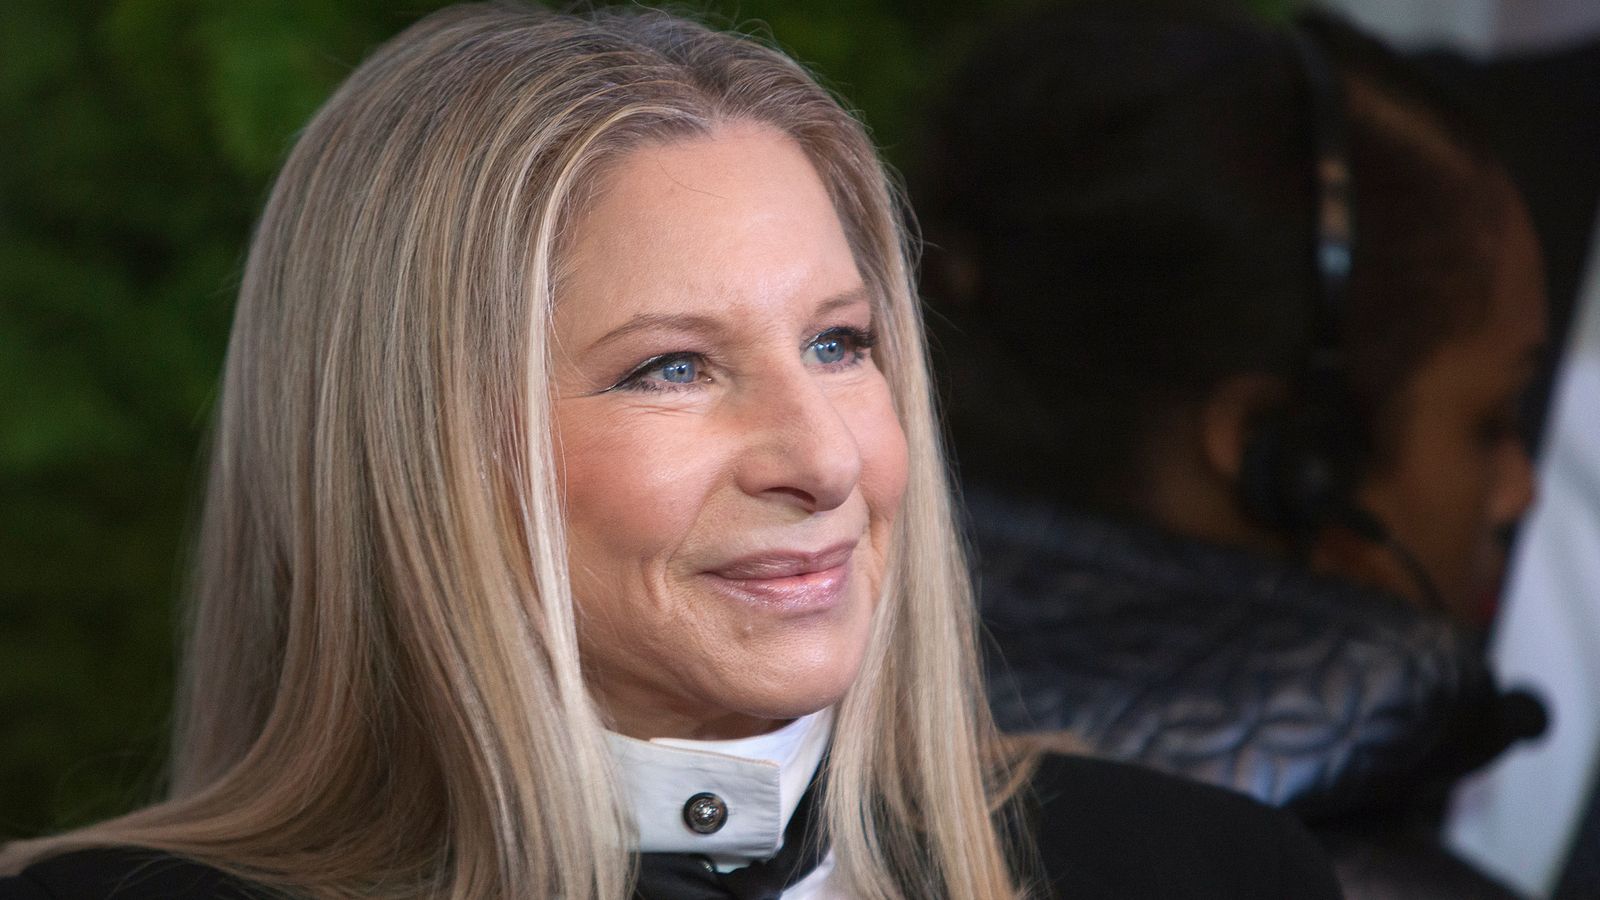 Barbra Streisand explains comment asking Melissa McCarthy about weight loss drug